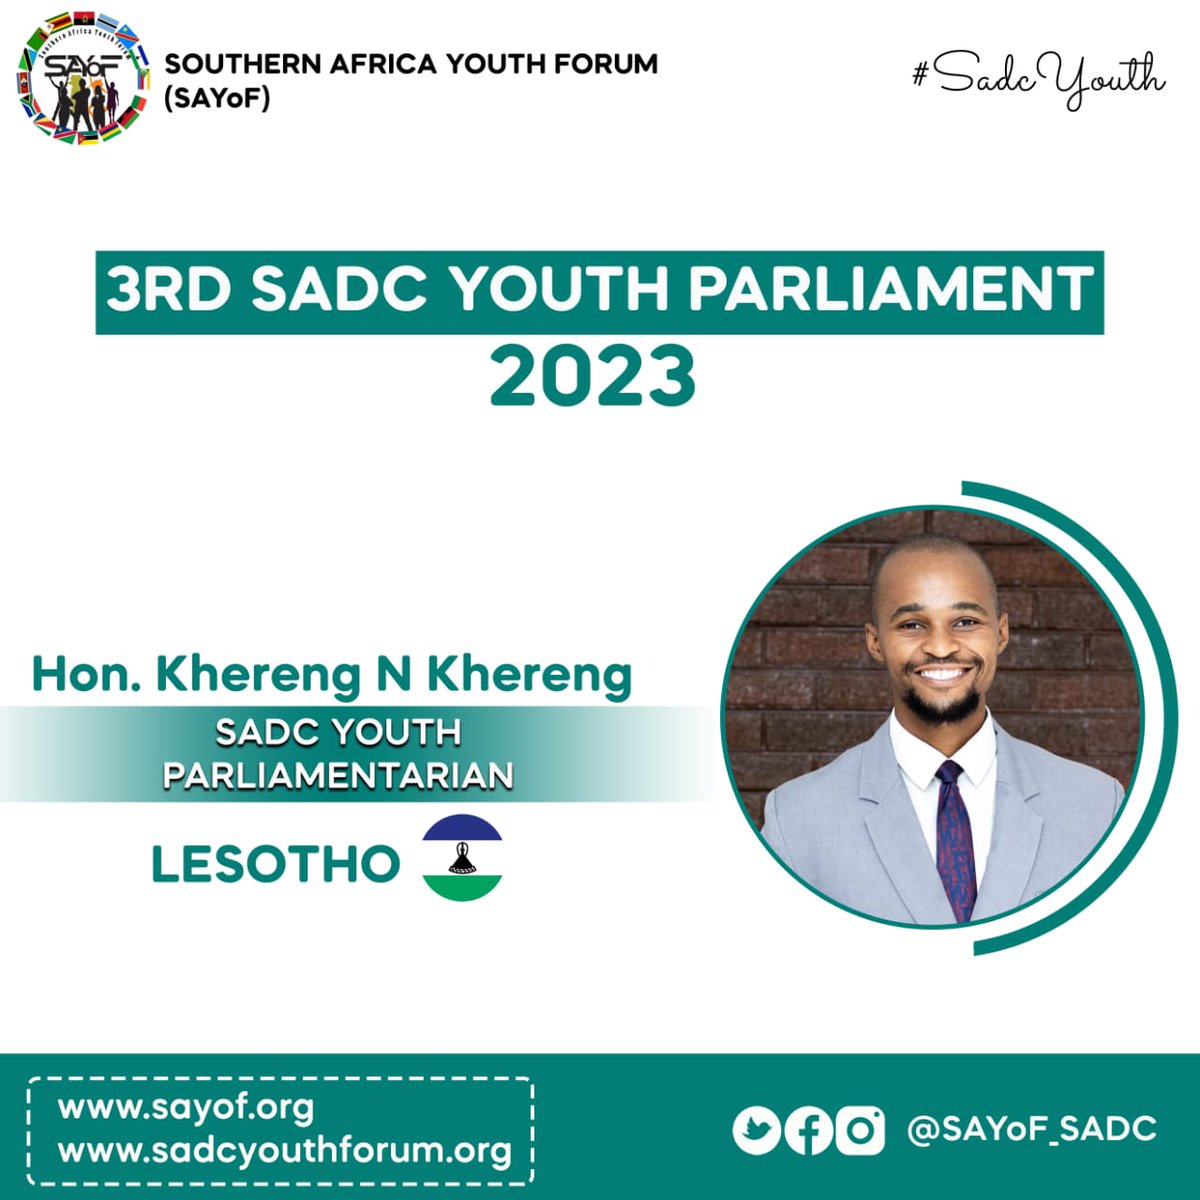 📢📢 3rd SADC Youth Parliament

I am excited to announce that I have been selected to be the representative of Lesotho for the 3rd SADC Youth Parliament. This is an incredible opportunity to engage in policy advocacy and contribute to the development of our region.
#SADCYouth